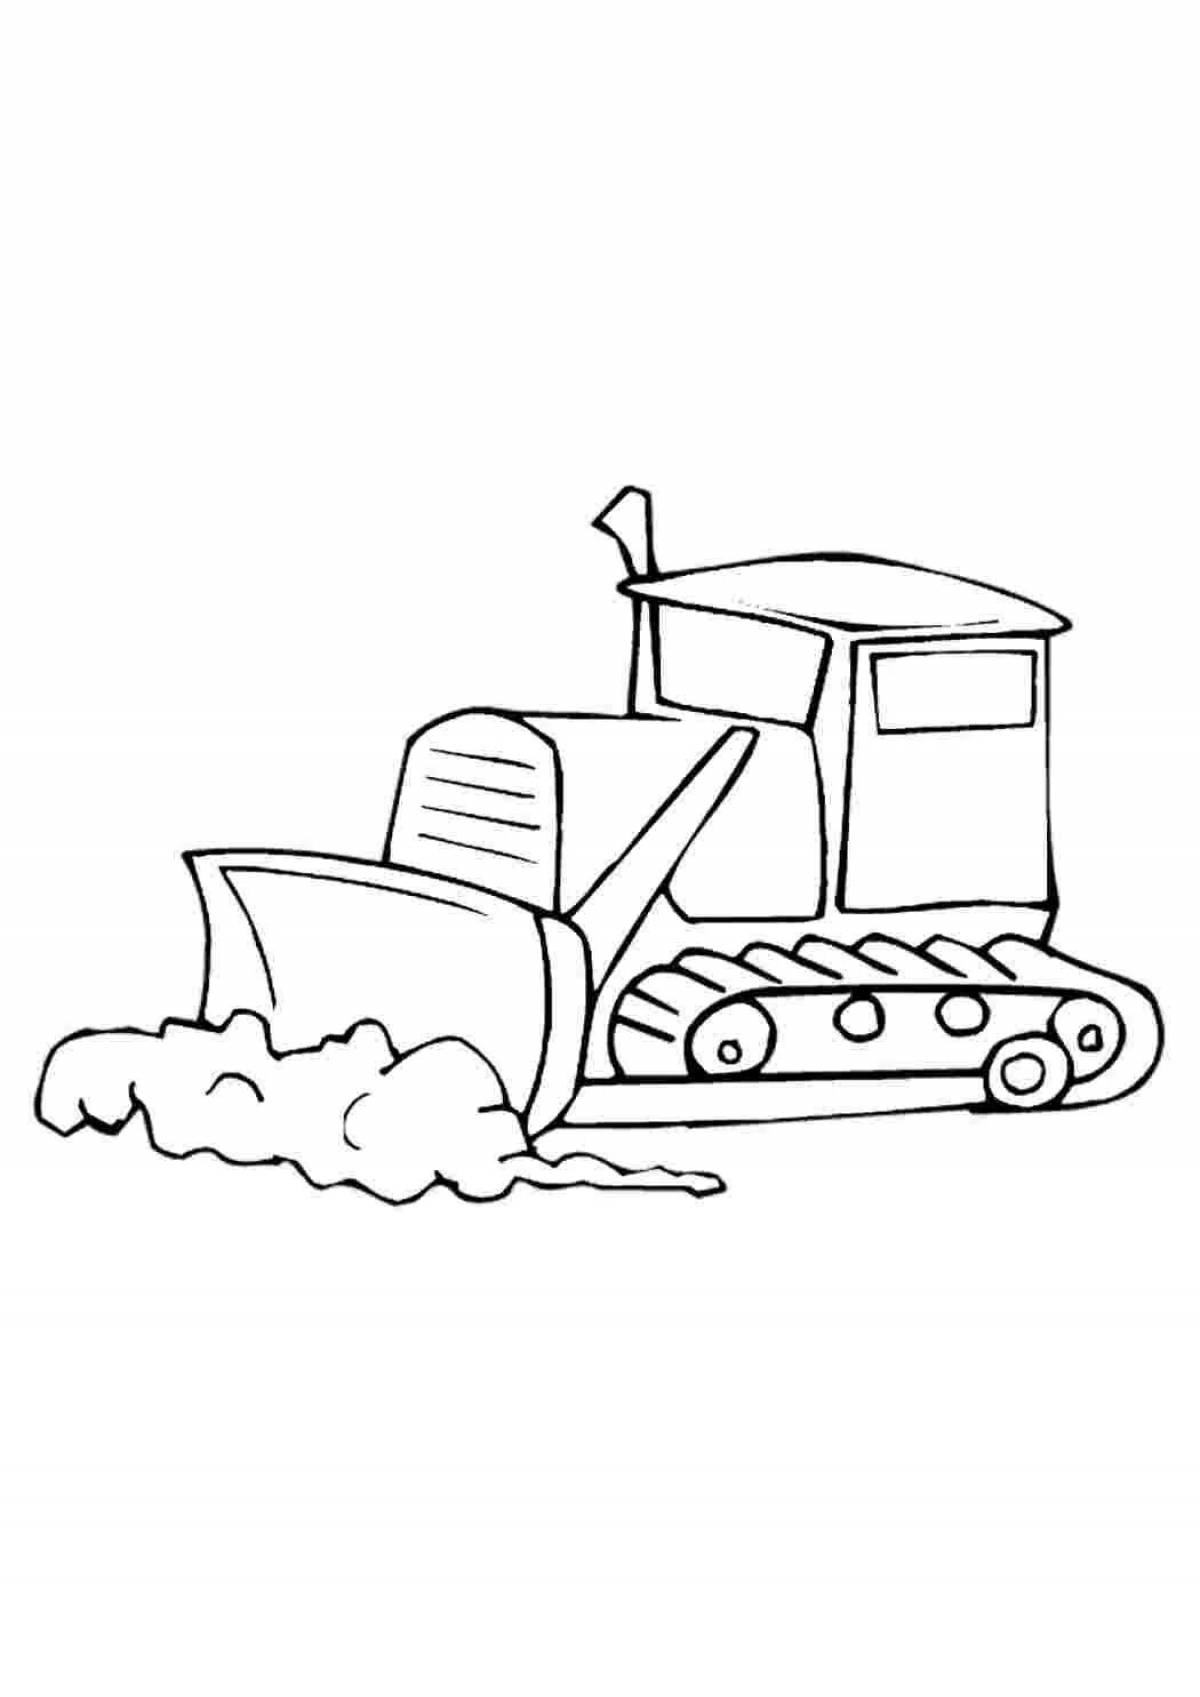 Creative snow blower coloring book for kids